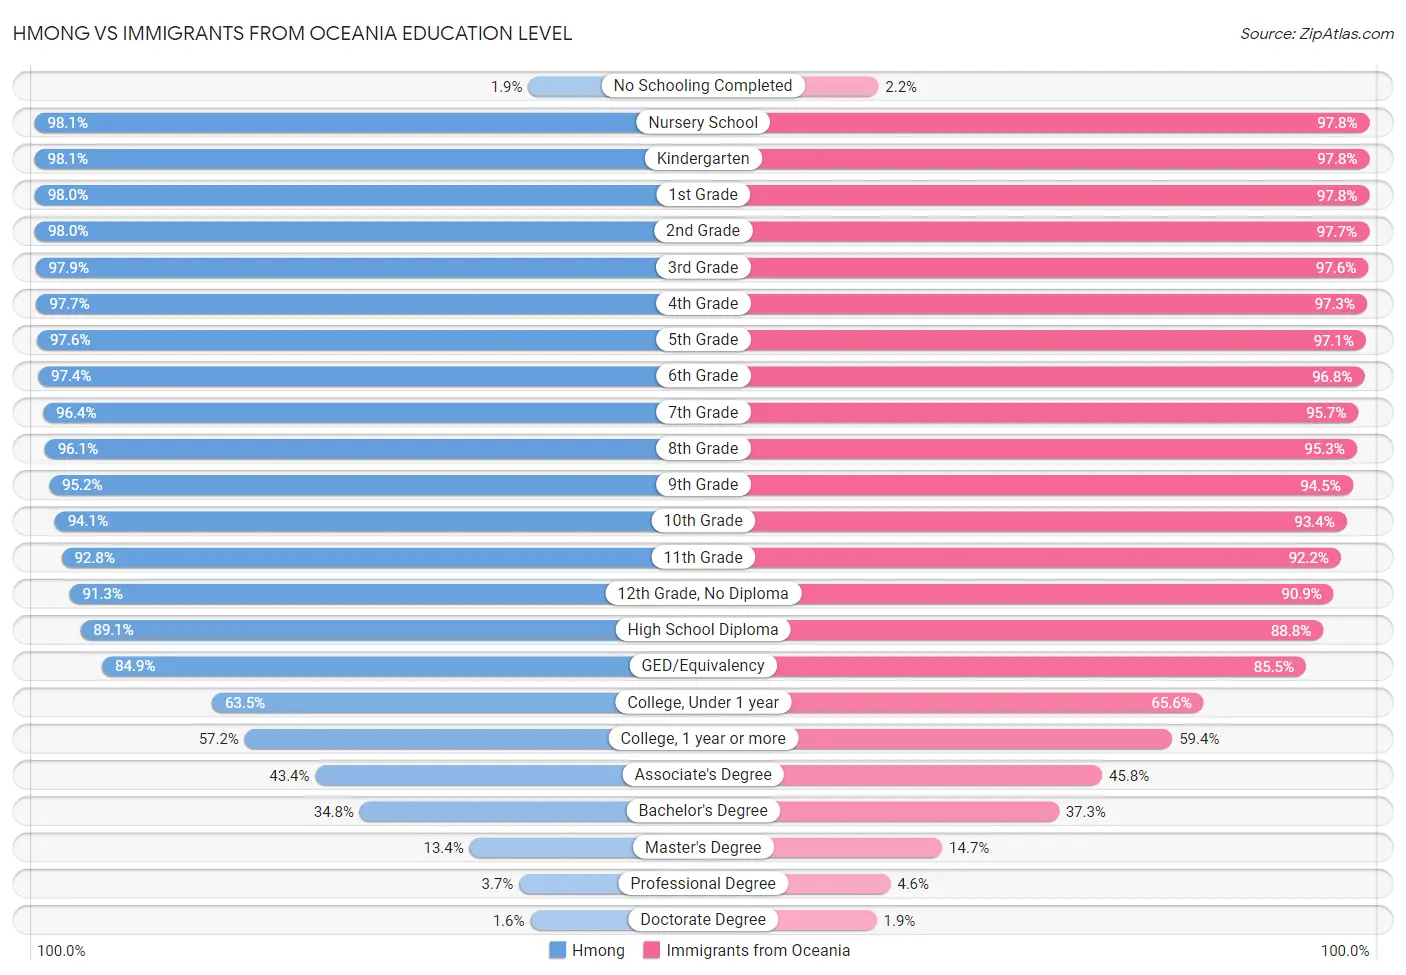 Hmong vs Immigrants from Oceania Education Level